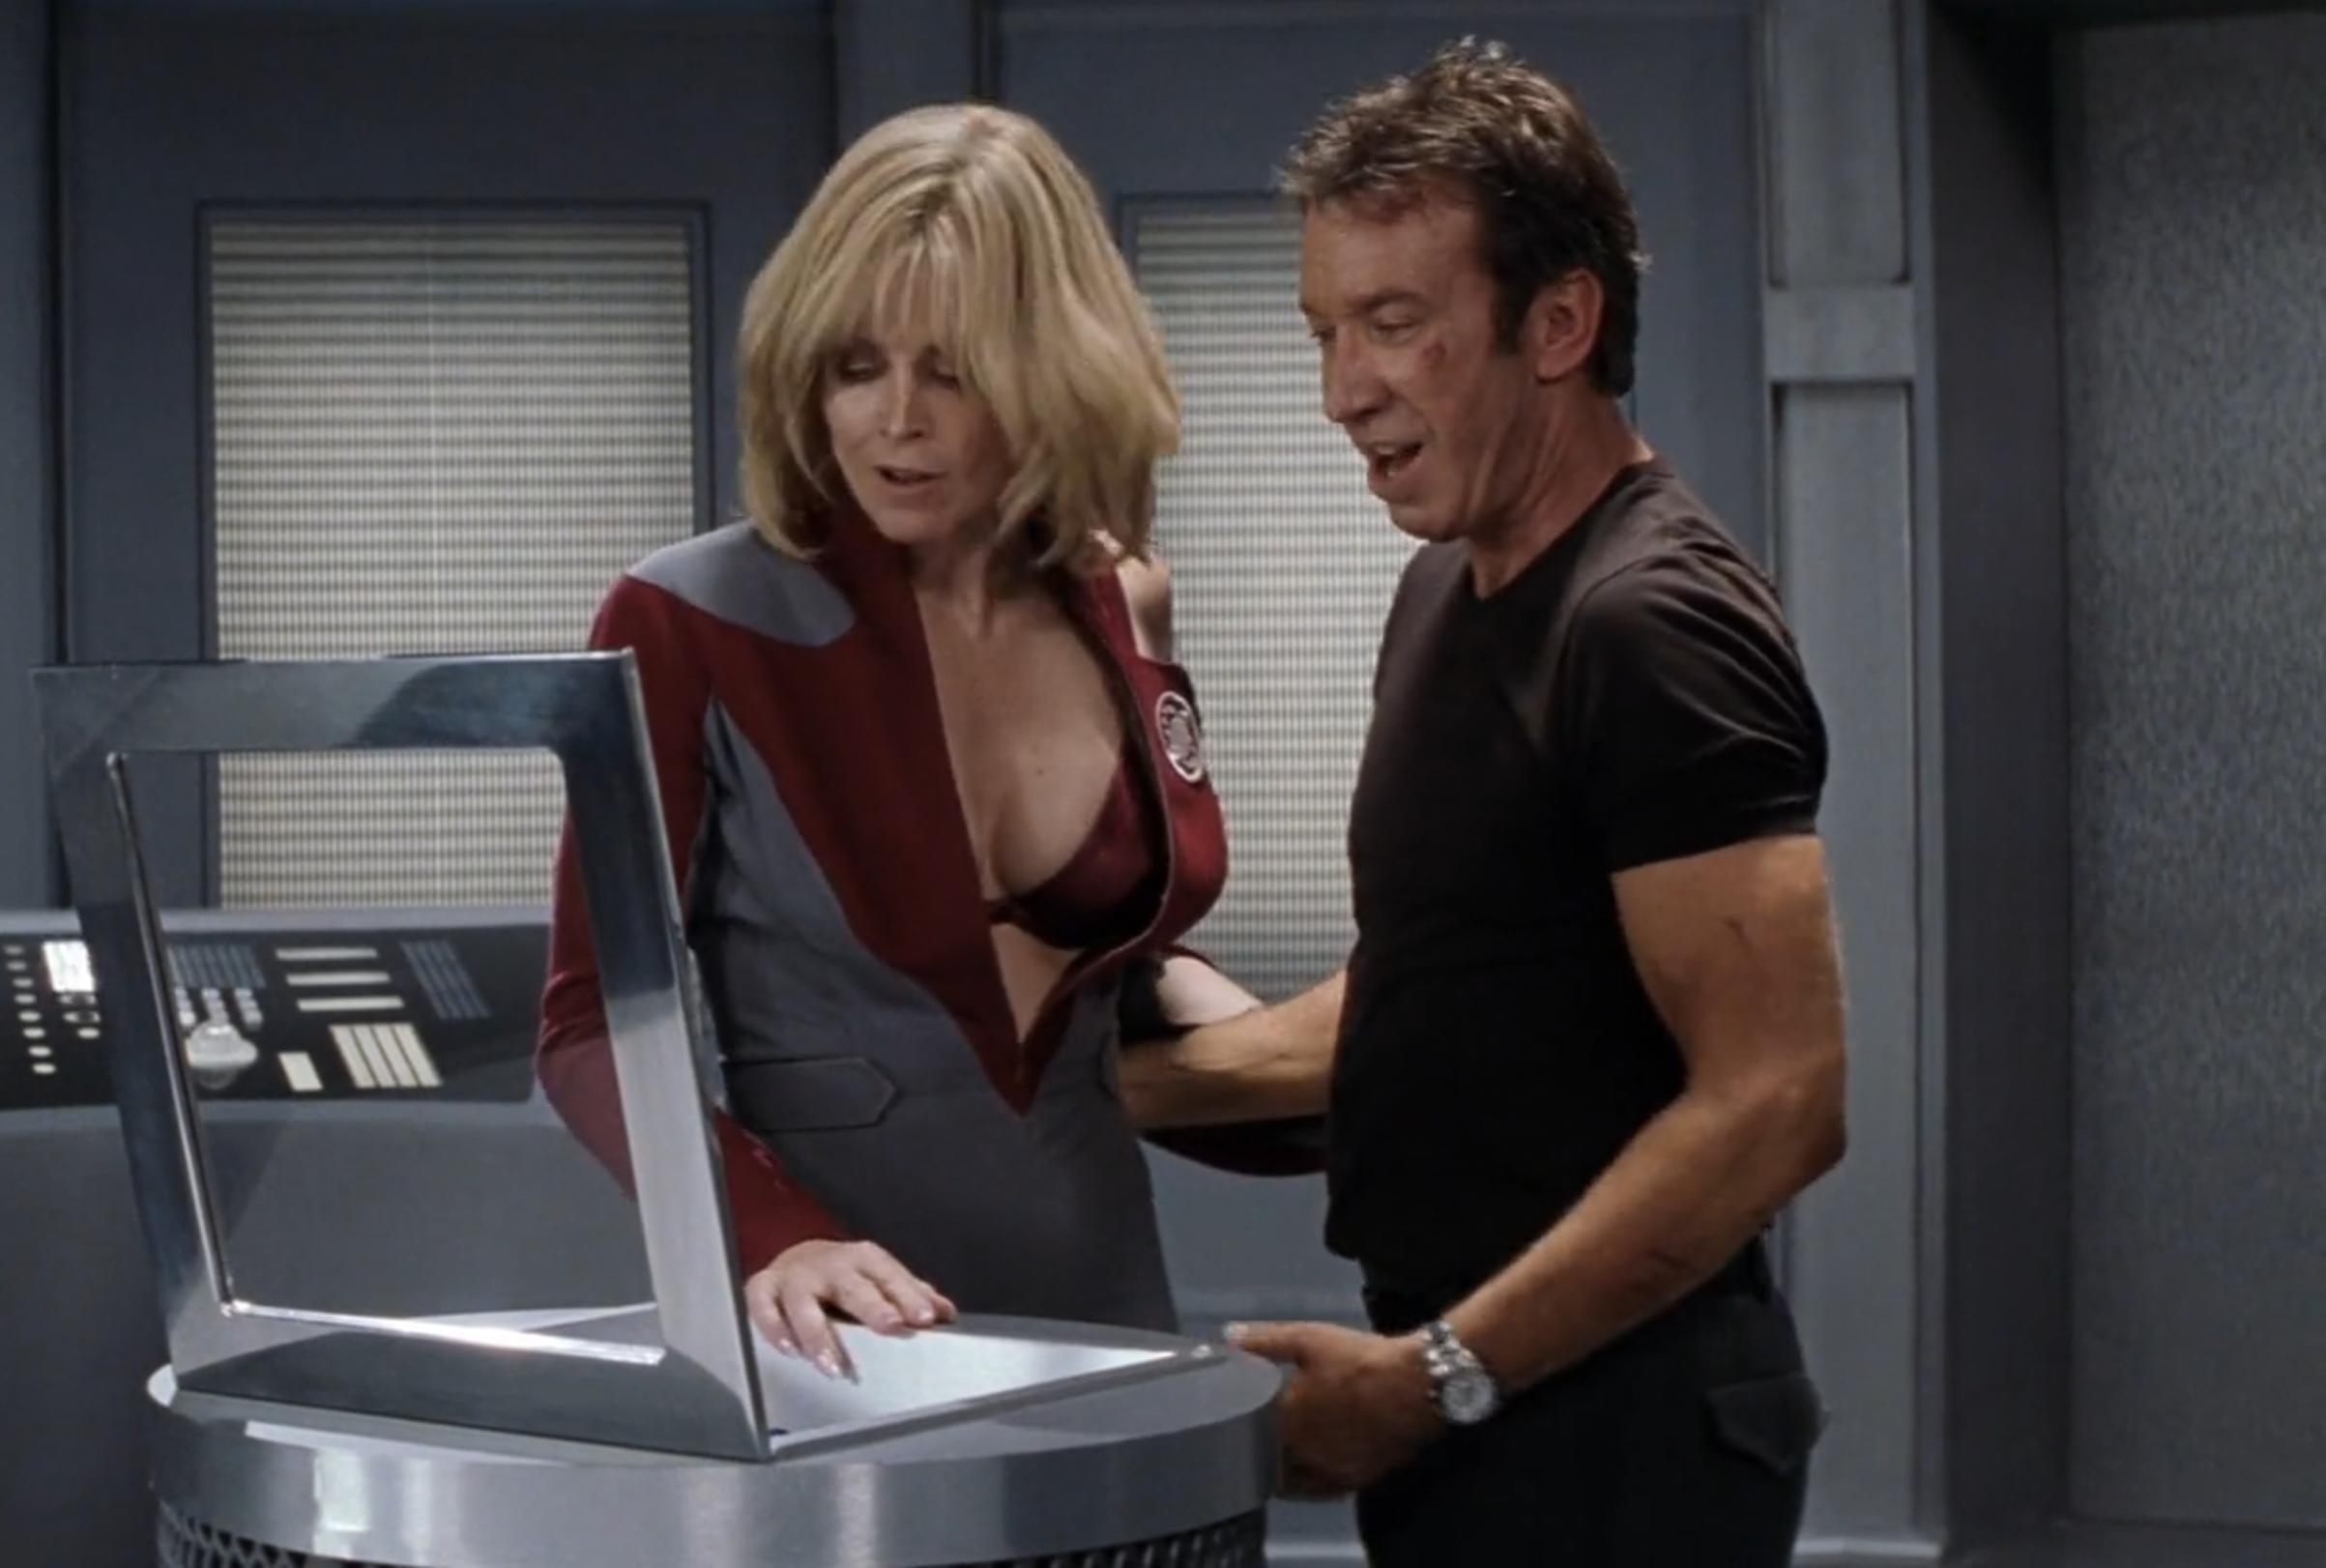 Galaxy quest sigourney weaver naked